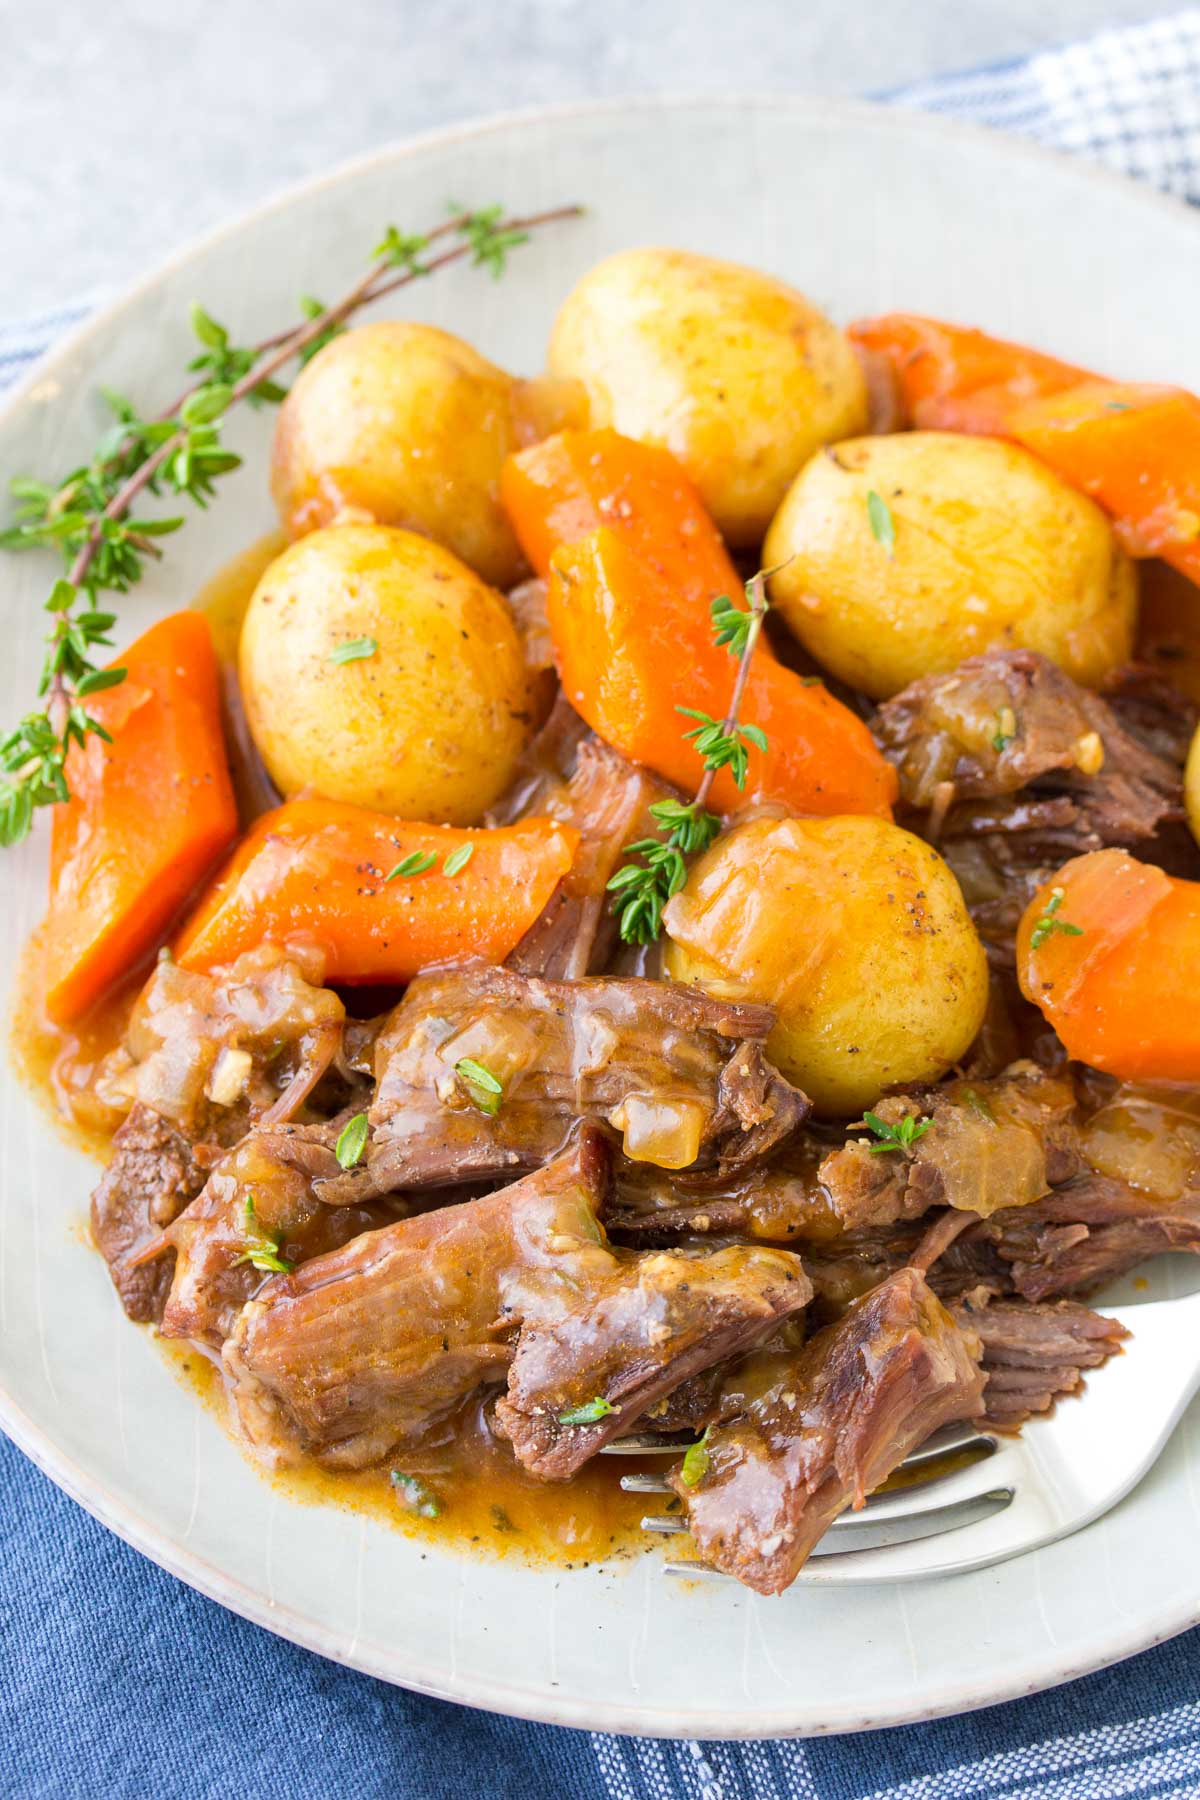 Pot roast with vegetables and gravy served on a plate.